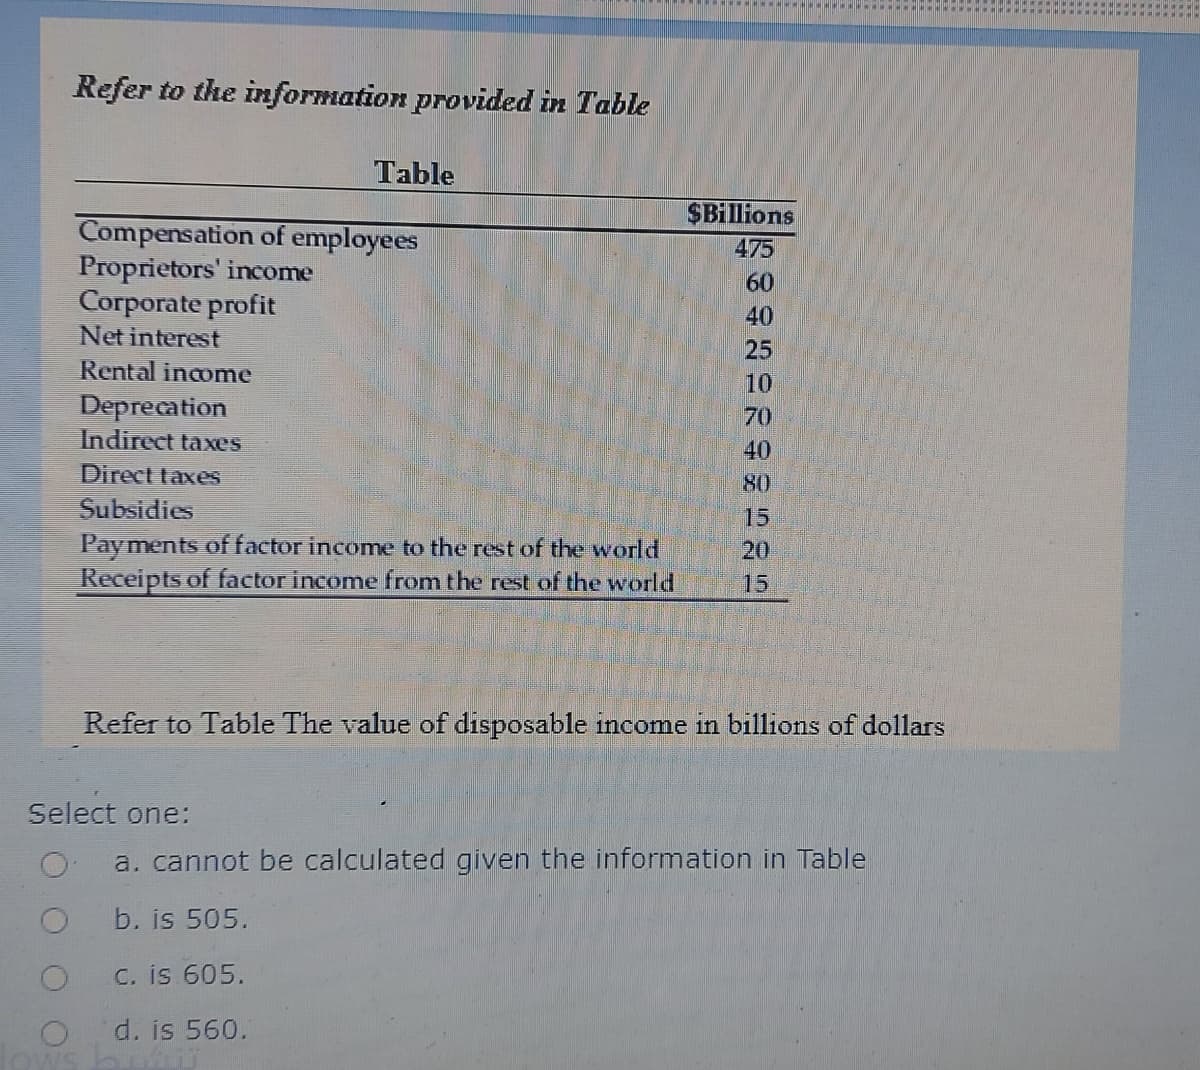 Refer to the information provided in Table
Table
Compensation of employees
Proprietors' income
Corporate profit
Net interest
$Billions
475
60
40
25
Rental income
Deprecation
Indirect taxes
10
70
40
Direct taxes
80
Subsidies
15
Pay ments of factor income to the rest of the world
Receipts of factor income from the rest of the world
20
15
Refer to Table The value of disposable income in billions of dollars
Select one:
a. cannot be calculated given the information in Table
b. is 505.
C. is 605.
d. is 560.
